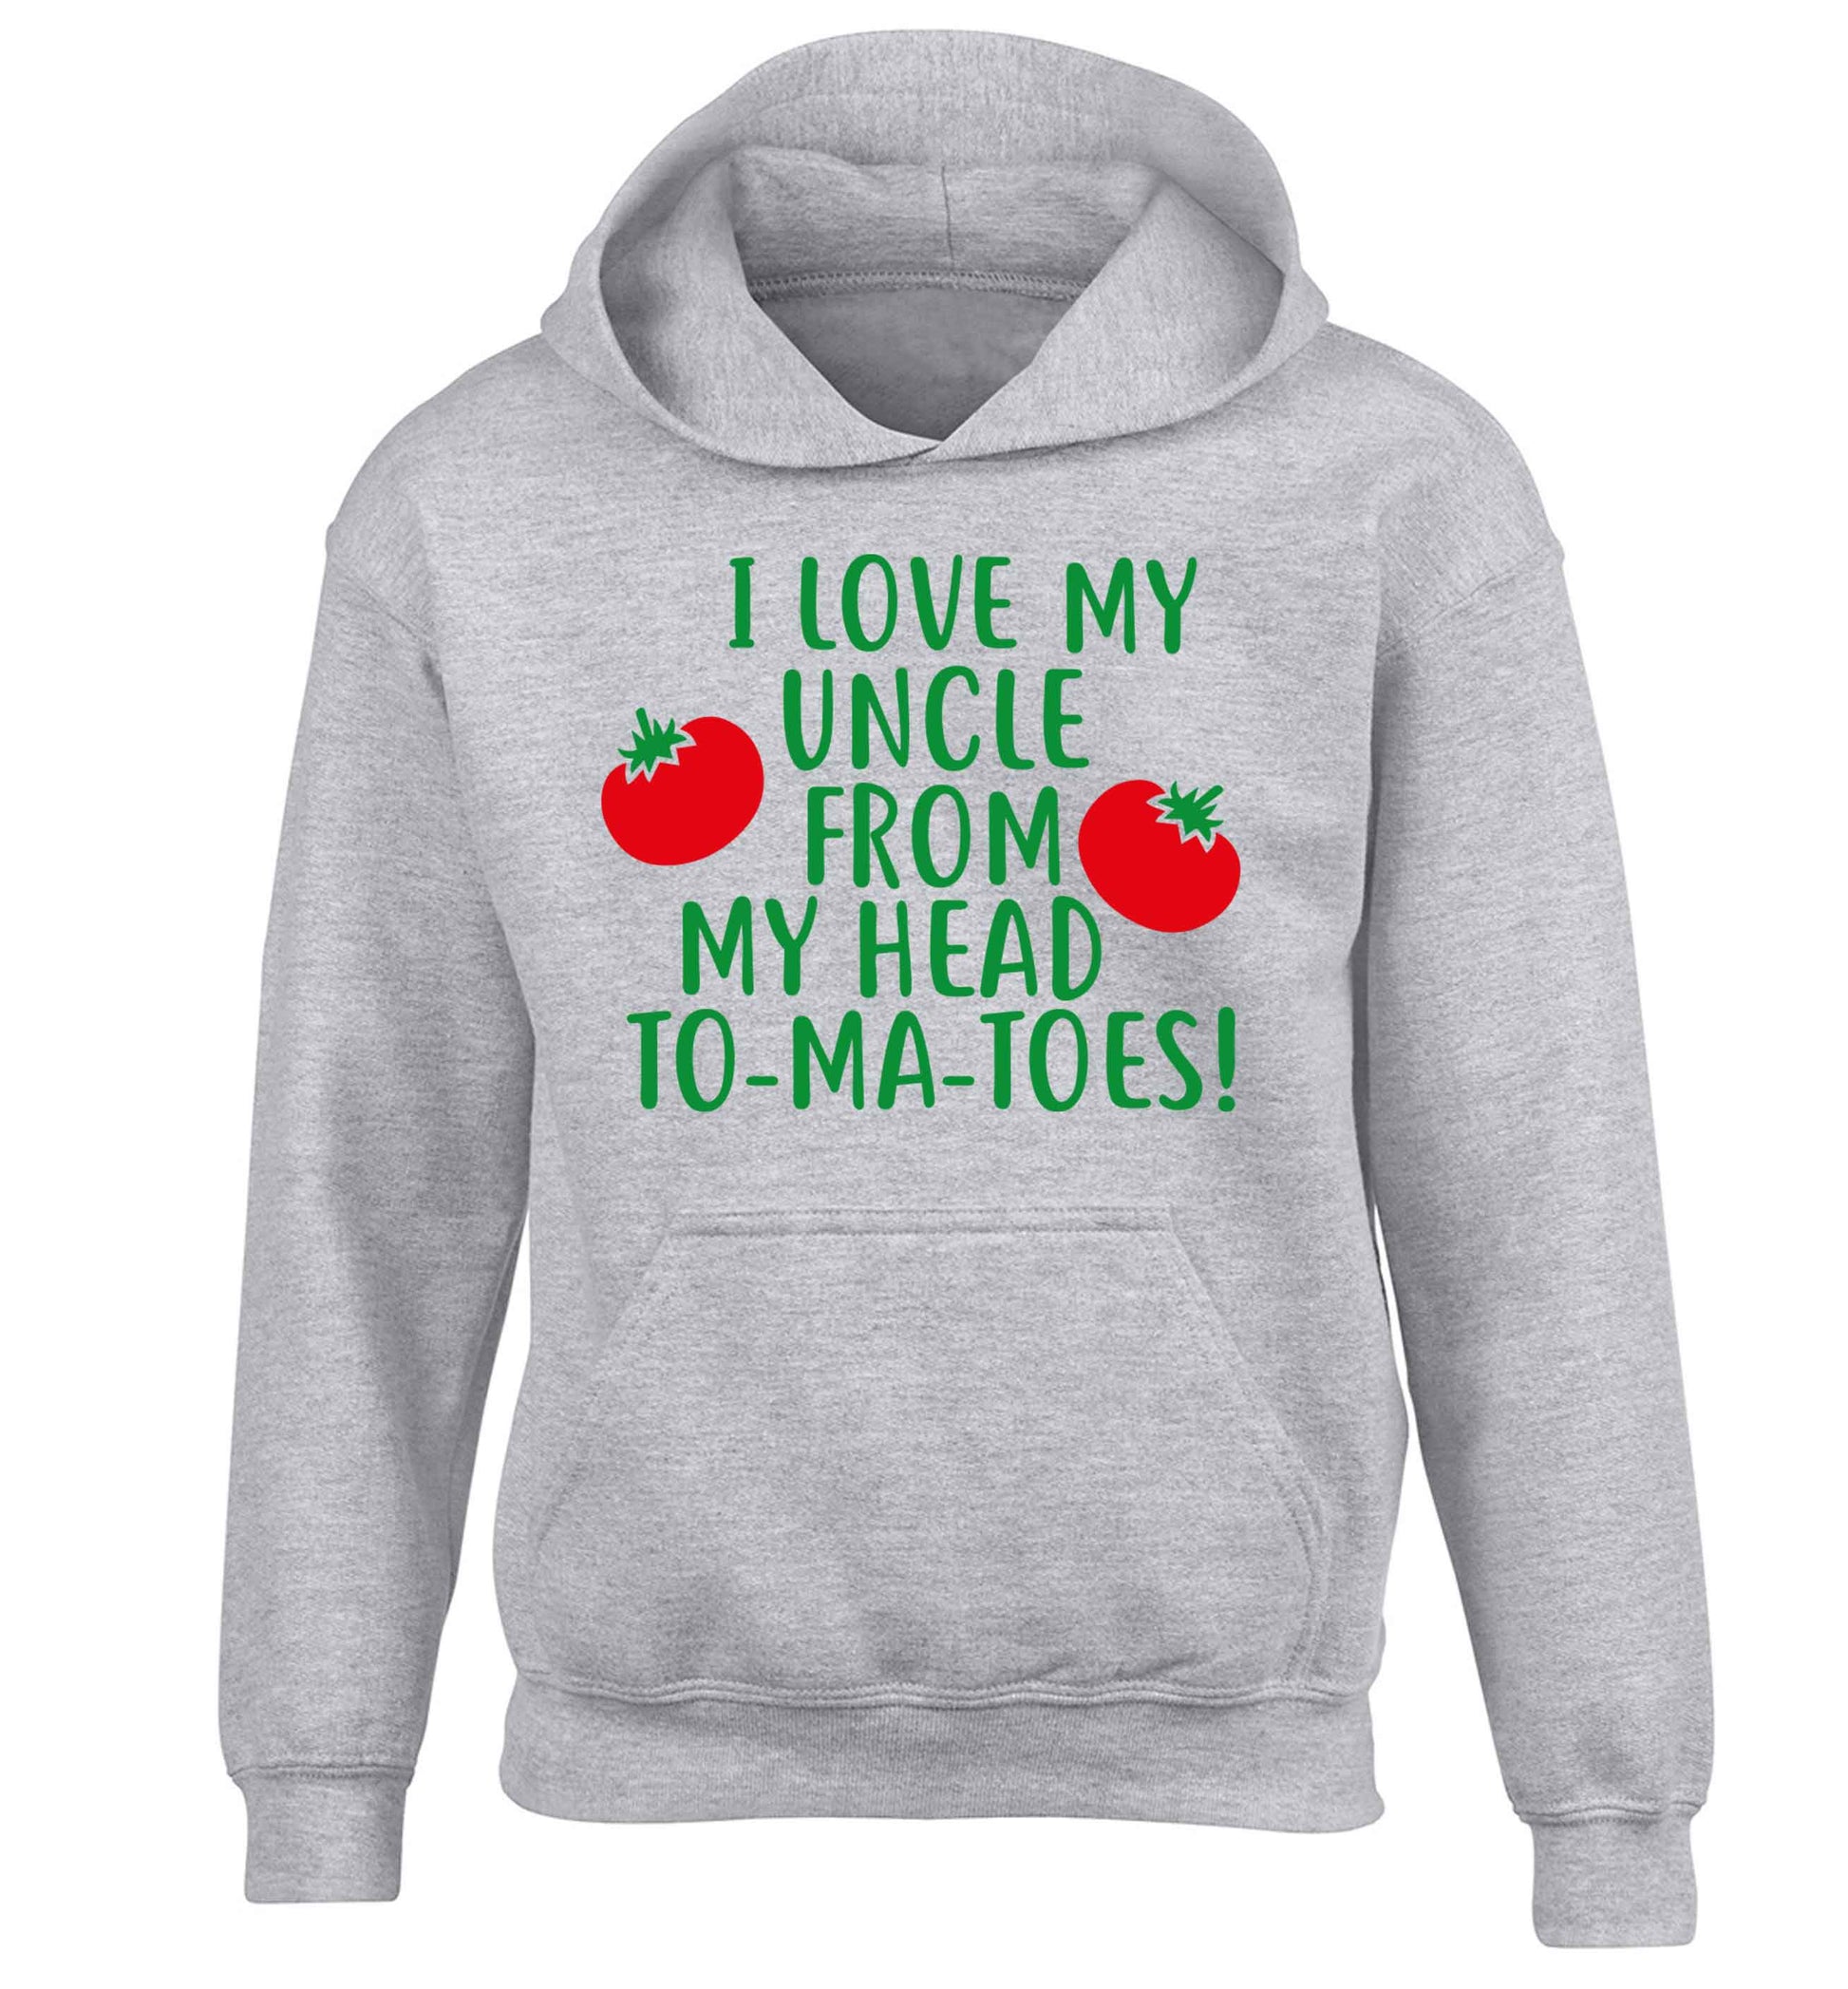 I love my uncle from my head To-Ma-Toes children's grey hoodie 12-13 Years